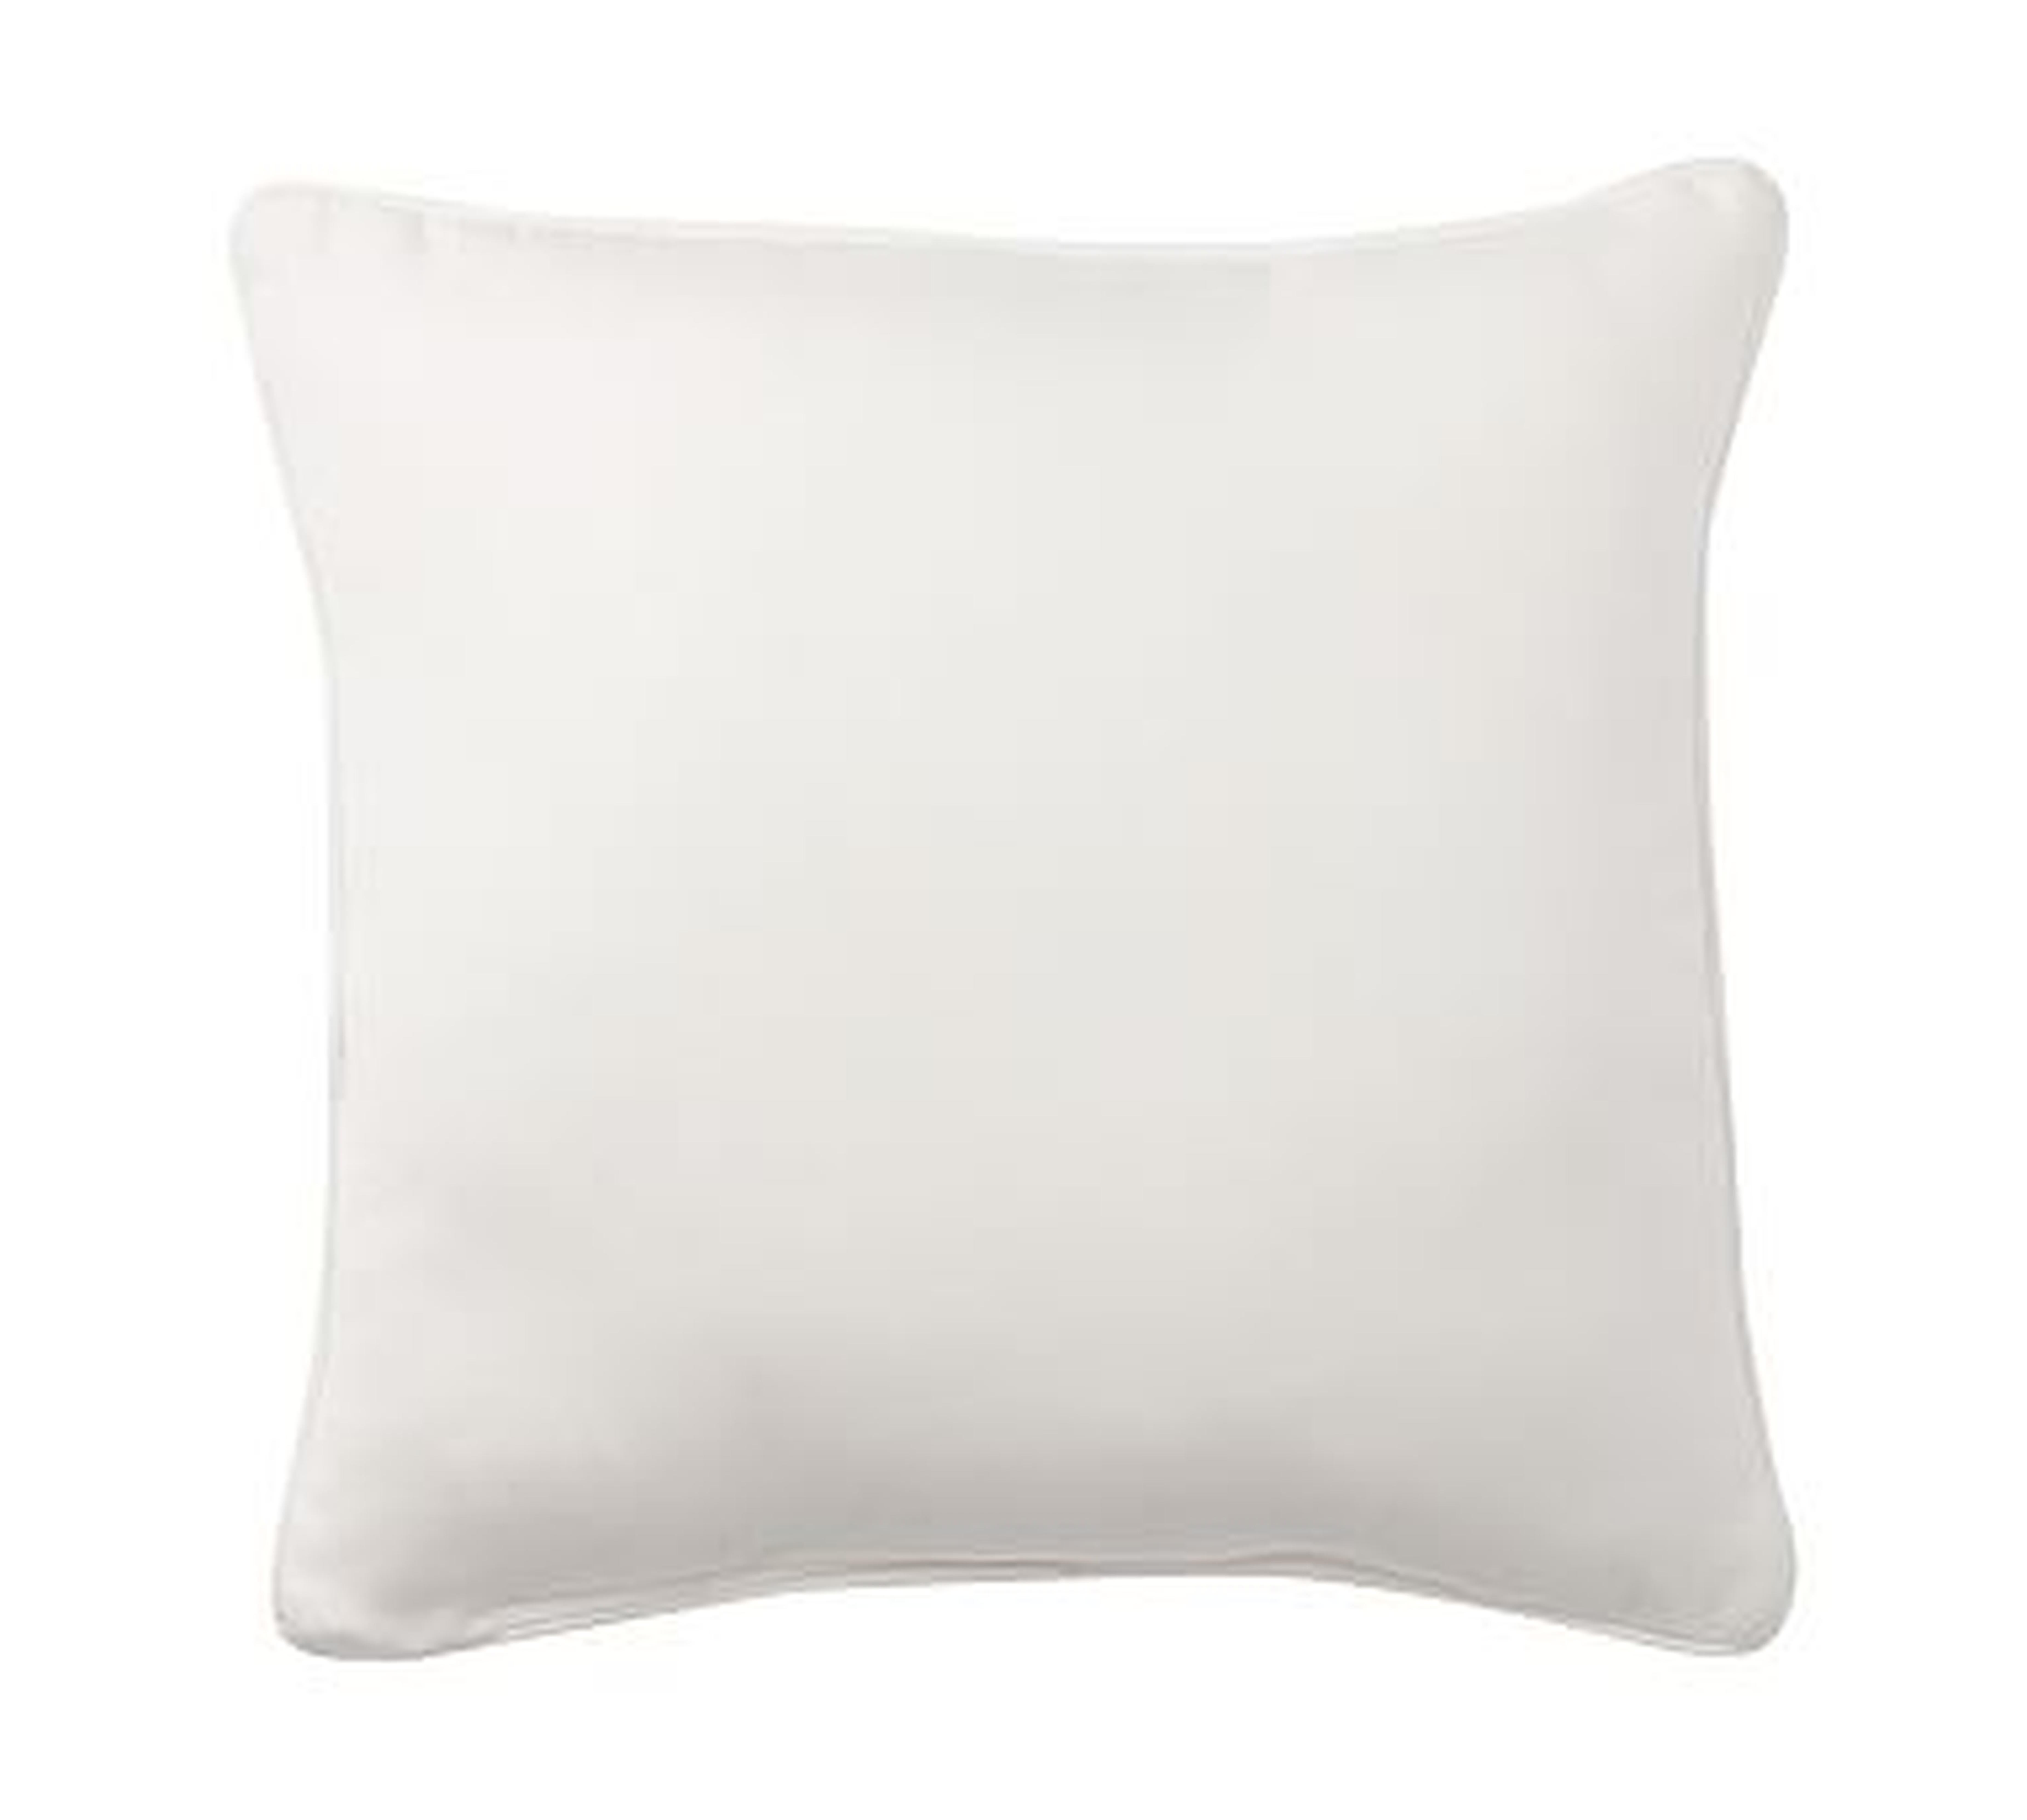 Sunbrella(R), Contrast Piped Solid Outdoor Pillow, 24", Natural - Pottery Barn